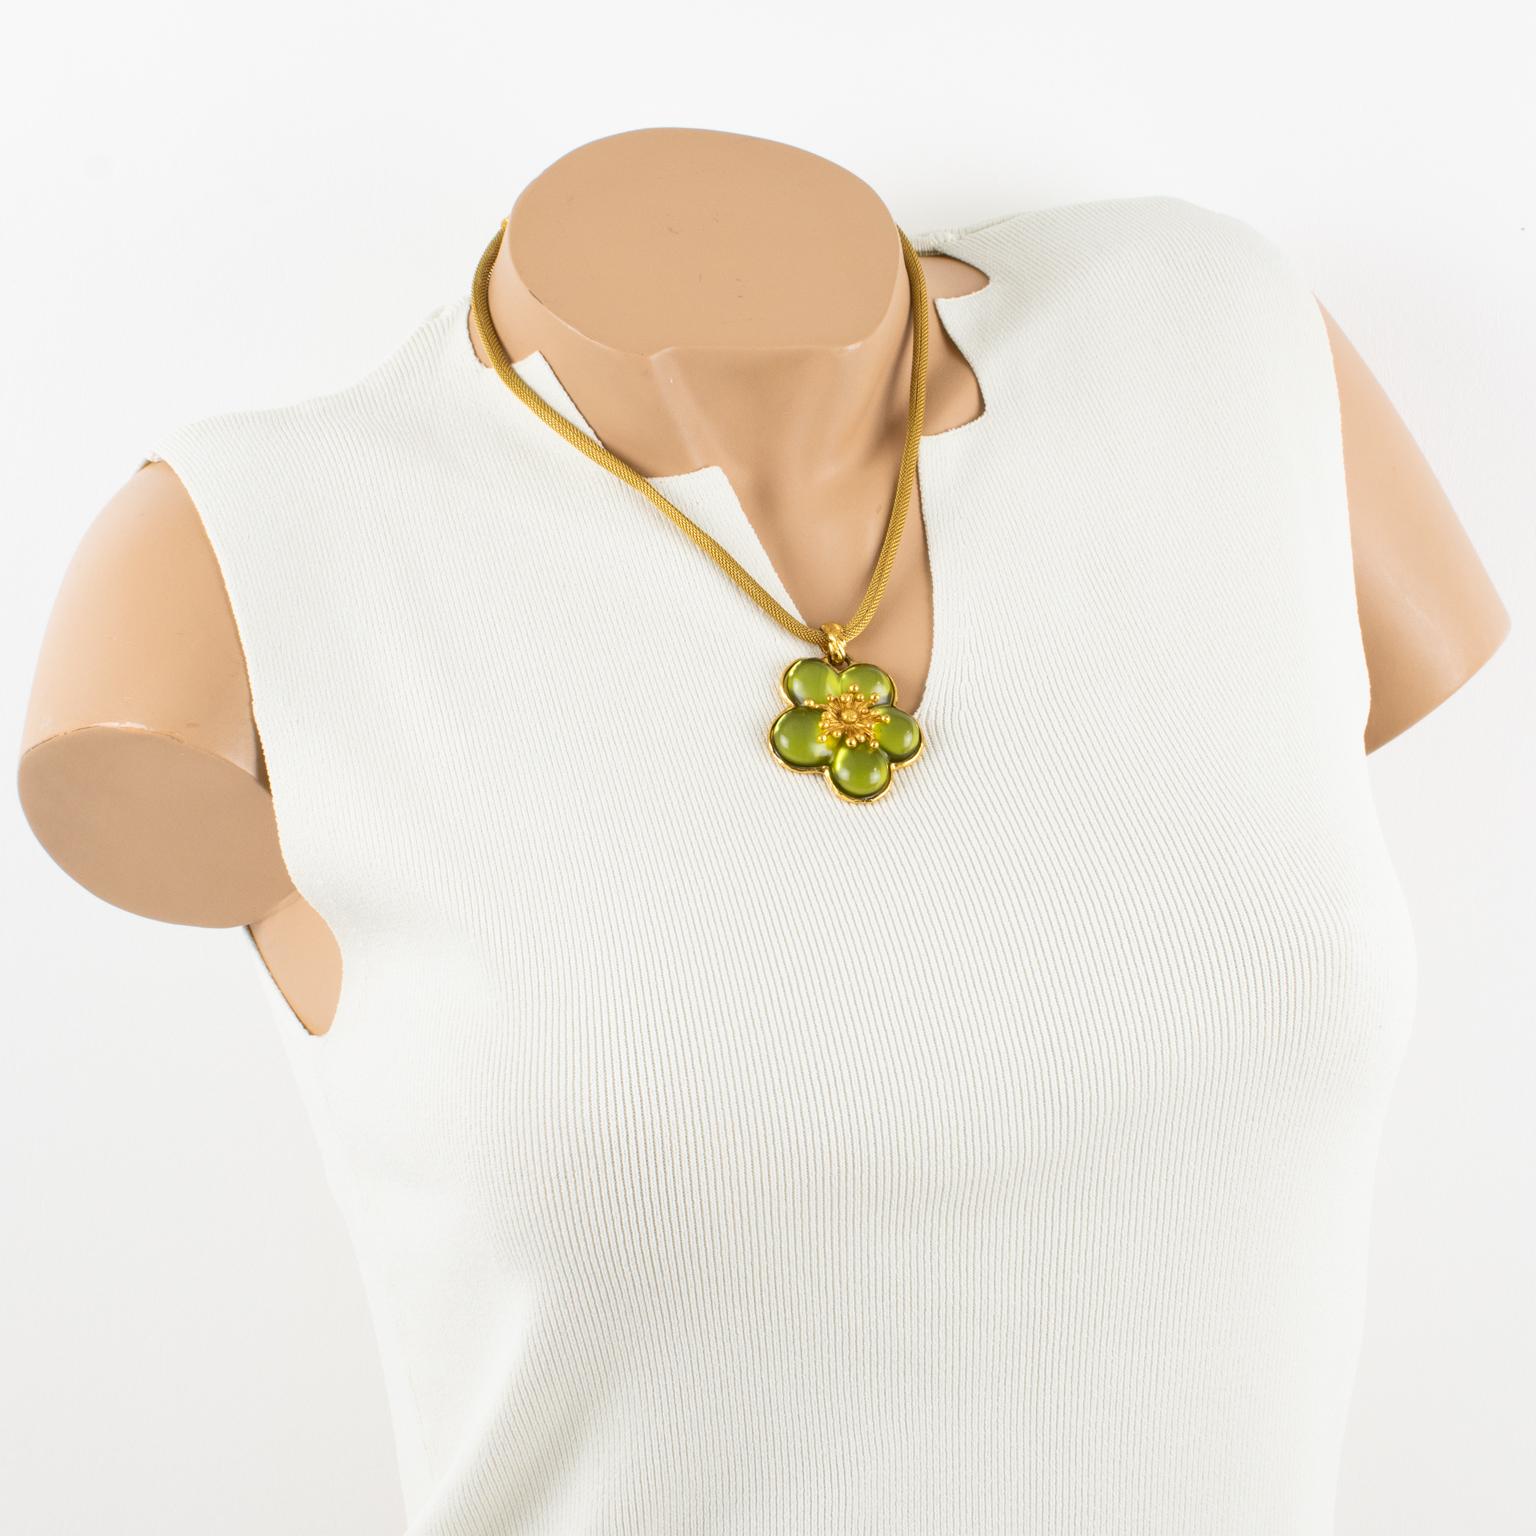 This elegant Kenzo Paris floral pendant necklace features a gilded metal turbogas chain ornate with a cherry blossom design floral pendant. 
The pendant rests on a gold metal frame. It is embellished with avocado green resin. The choker closes with